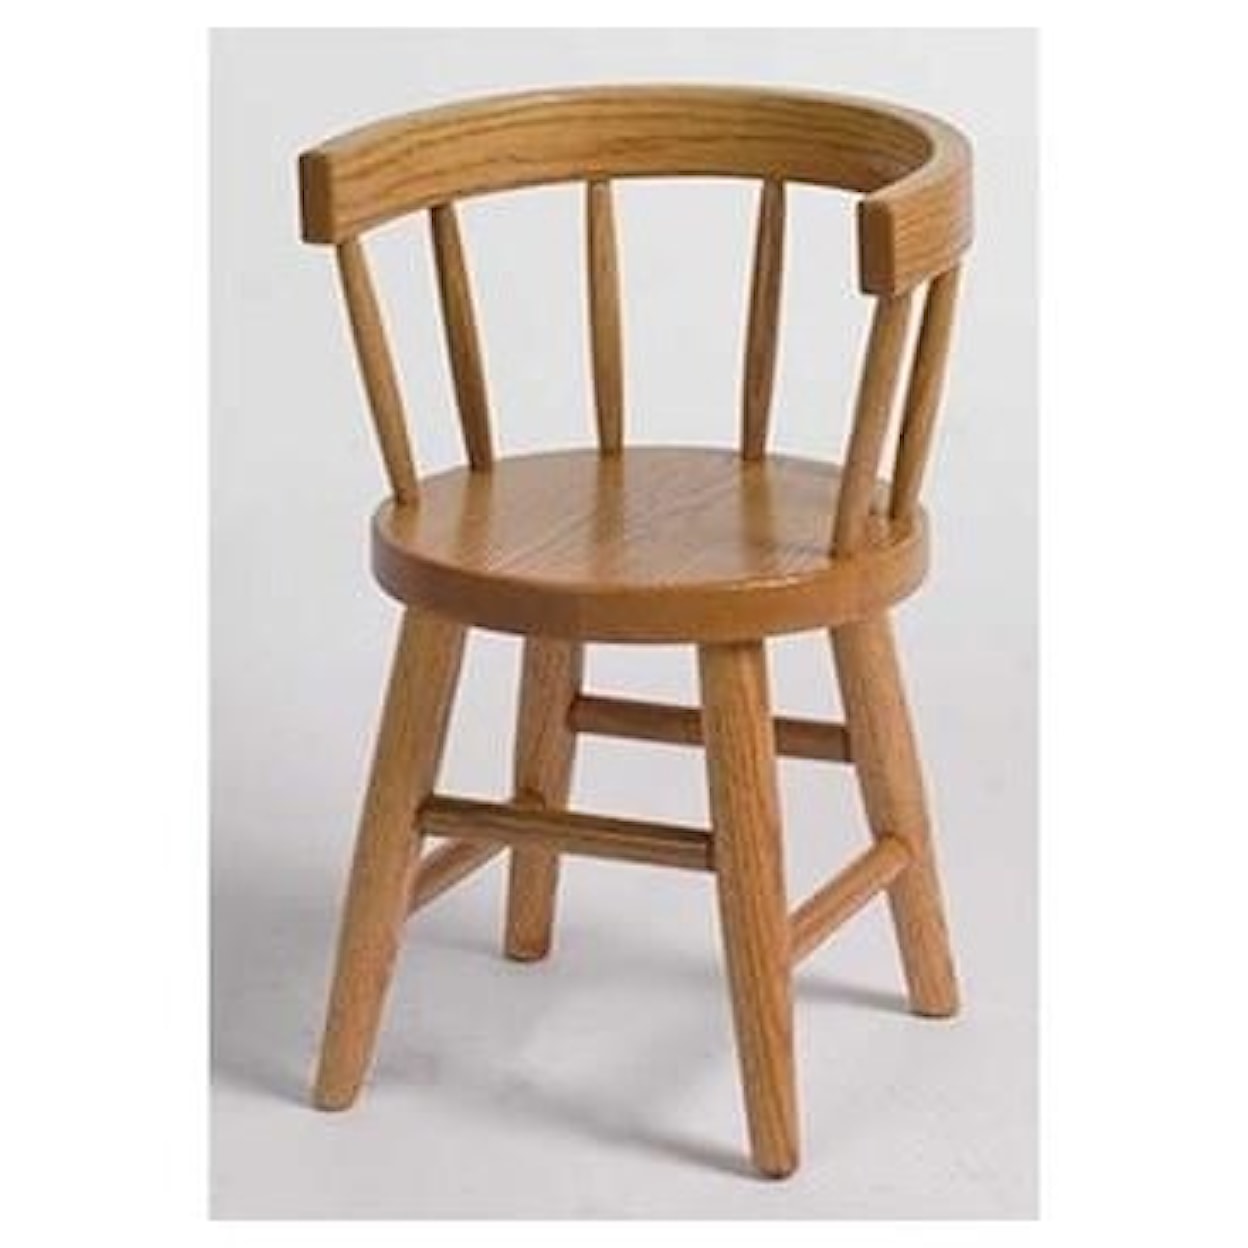 Horseshoe Bend Child Solid Wood Customizable 12" Child's Chair